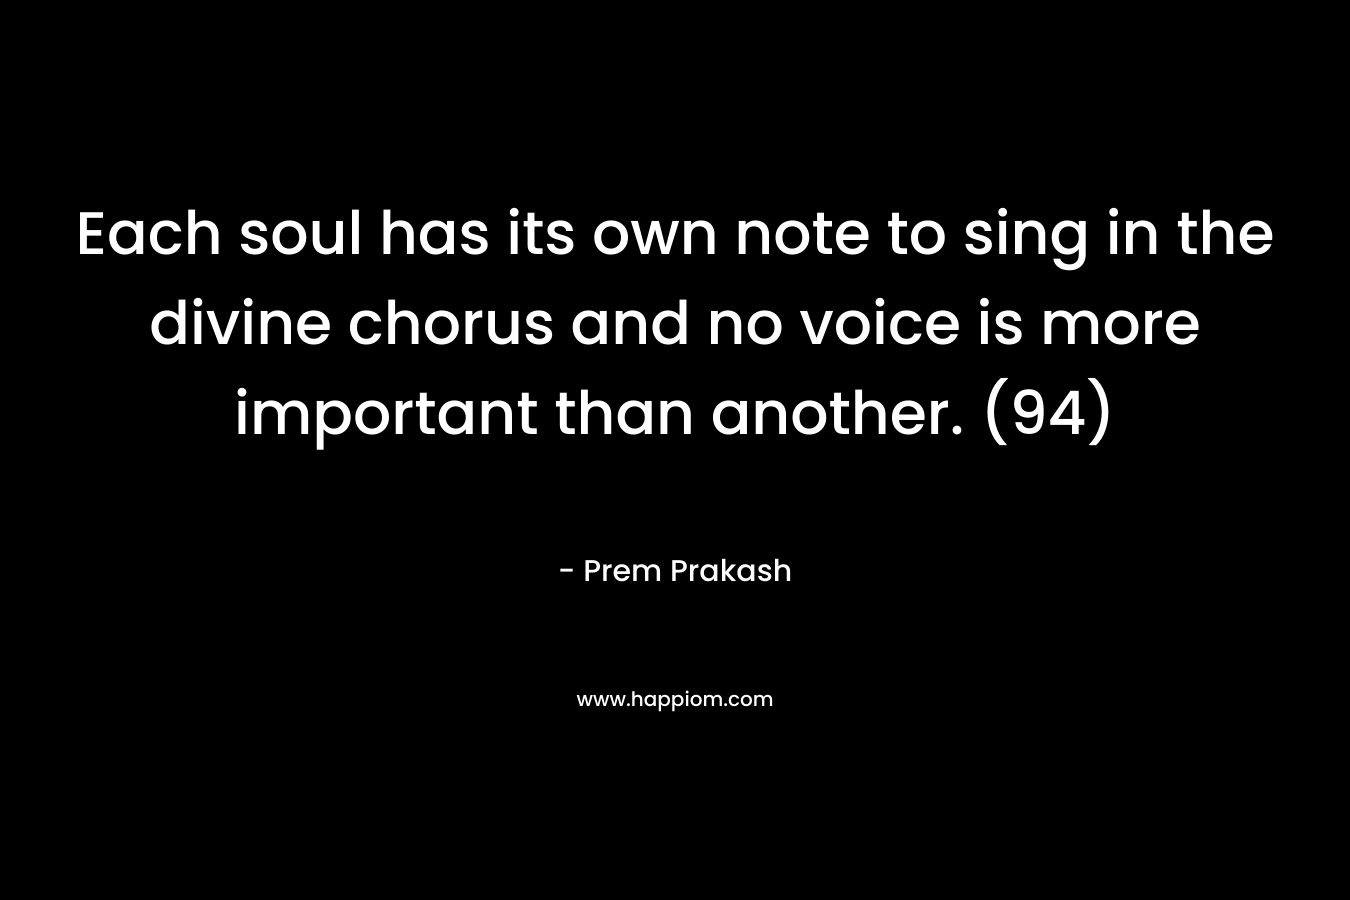 Each soul has its own note to sing in the divine chorus and no voice is more important than another. (94)